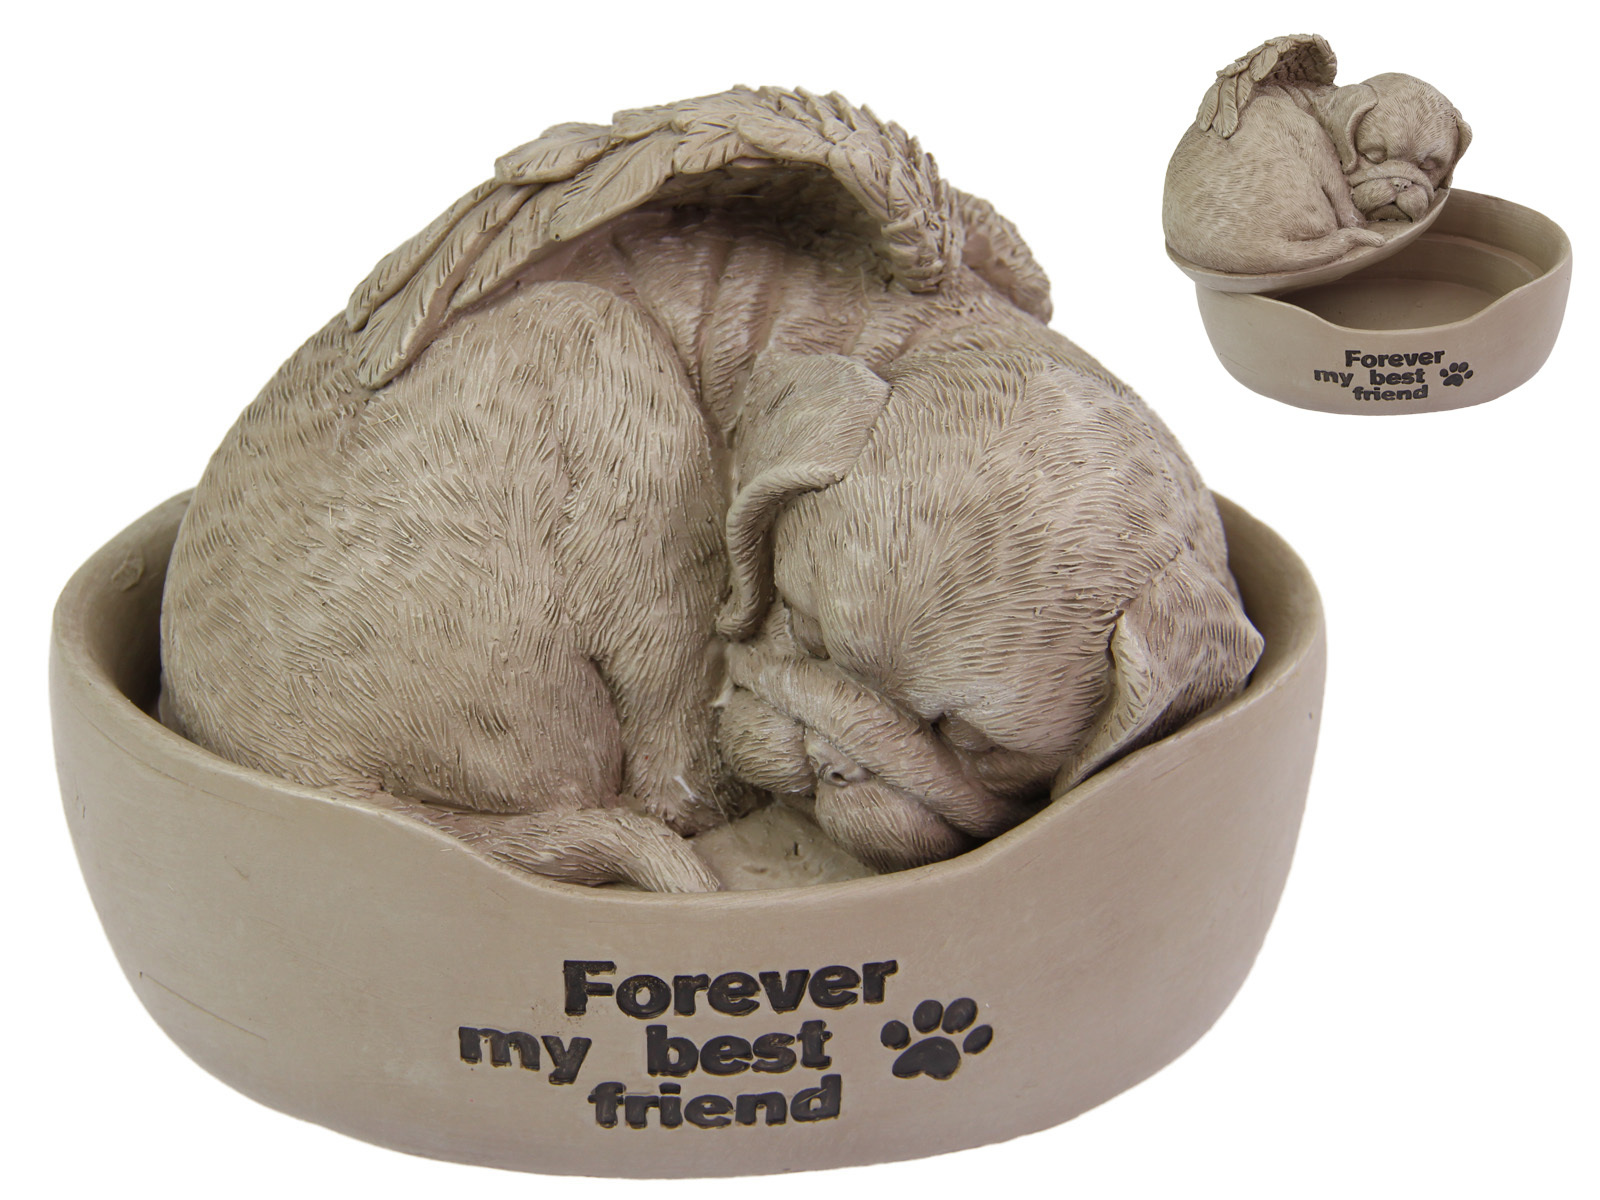 Ashes Urn Case For Dog Cremation Box 1pce 15cm Inspirational Plaque Resin